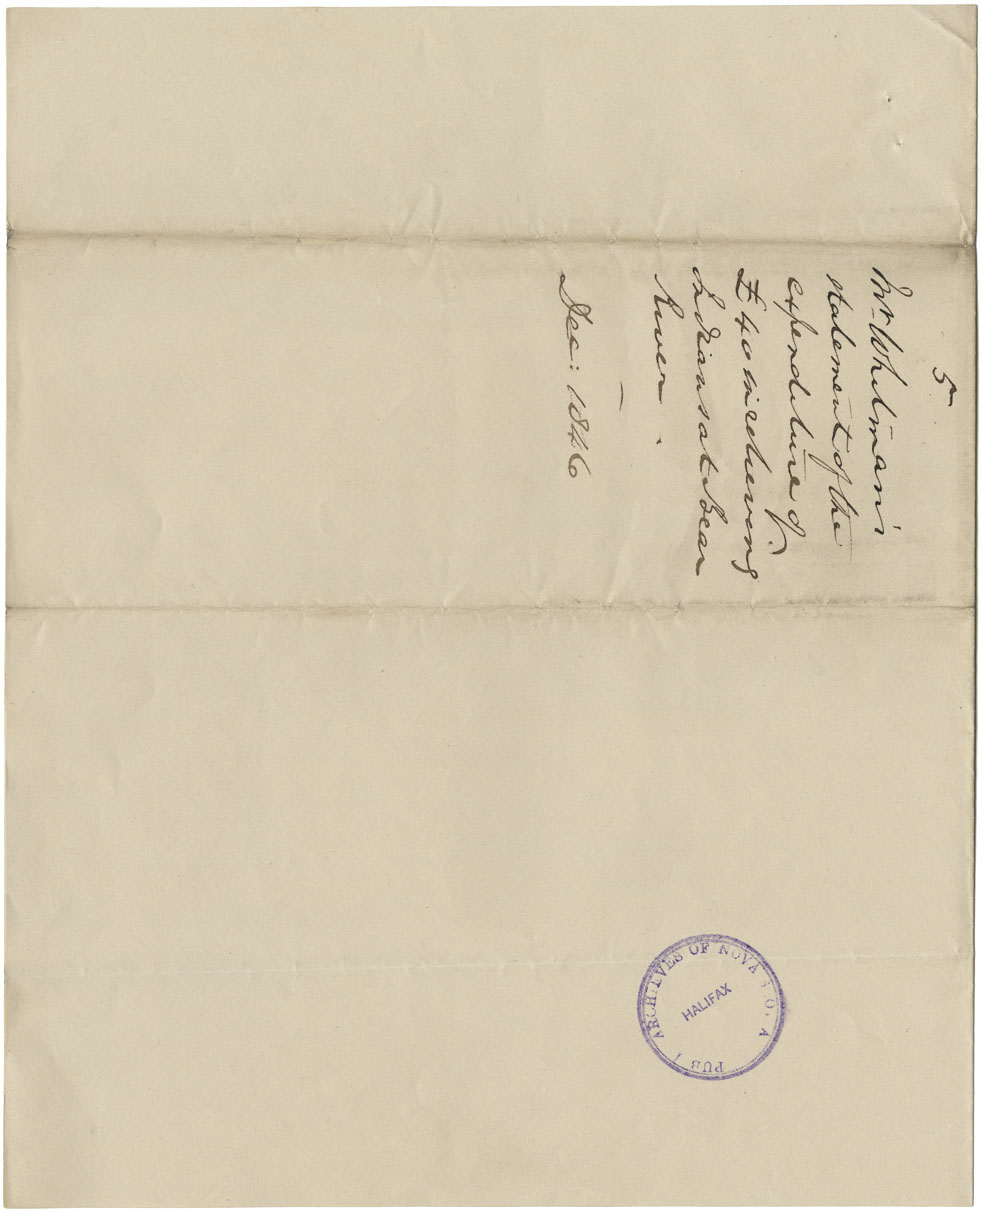 Bills and receipts of Dr. W.L. Bent for supplies for sick Bear River Mi'kmaq and list of supplies to individual Mi'kmaq bought by Alfred Whitman, with a letter from him to the Lieutenant-Governor thanking him for the donation. 